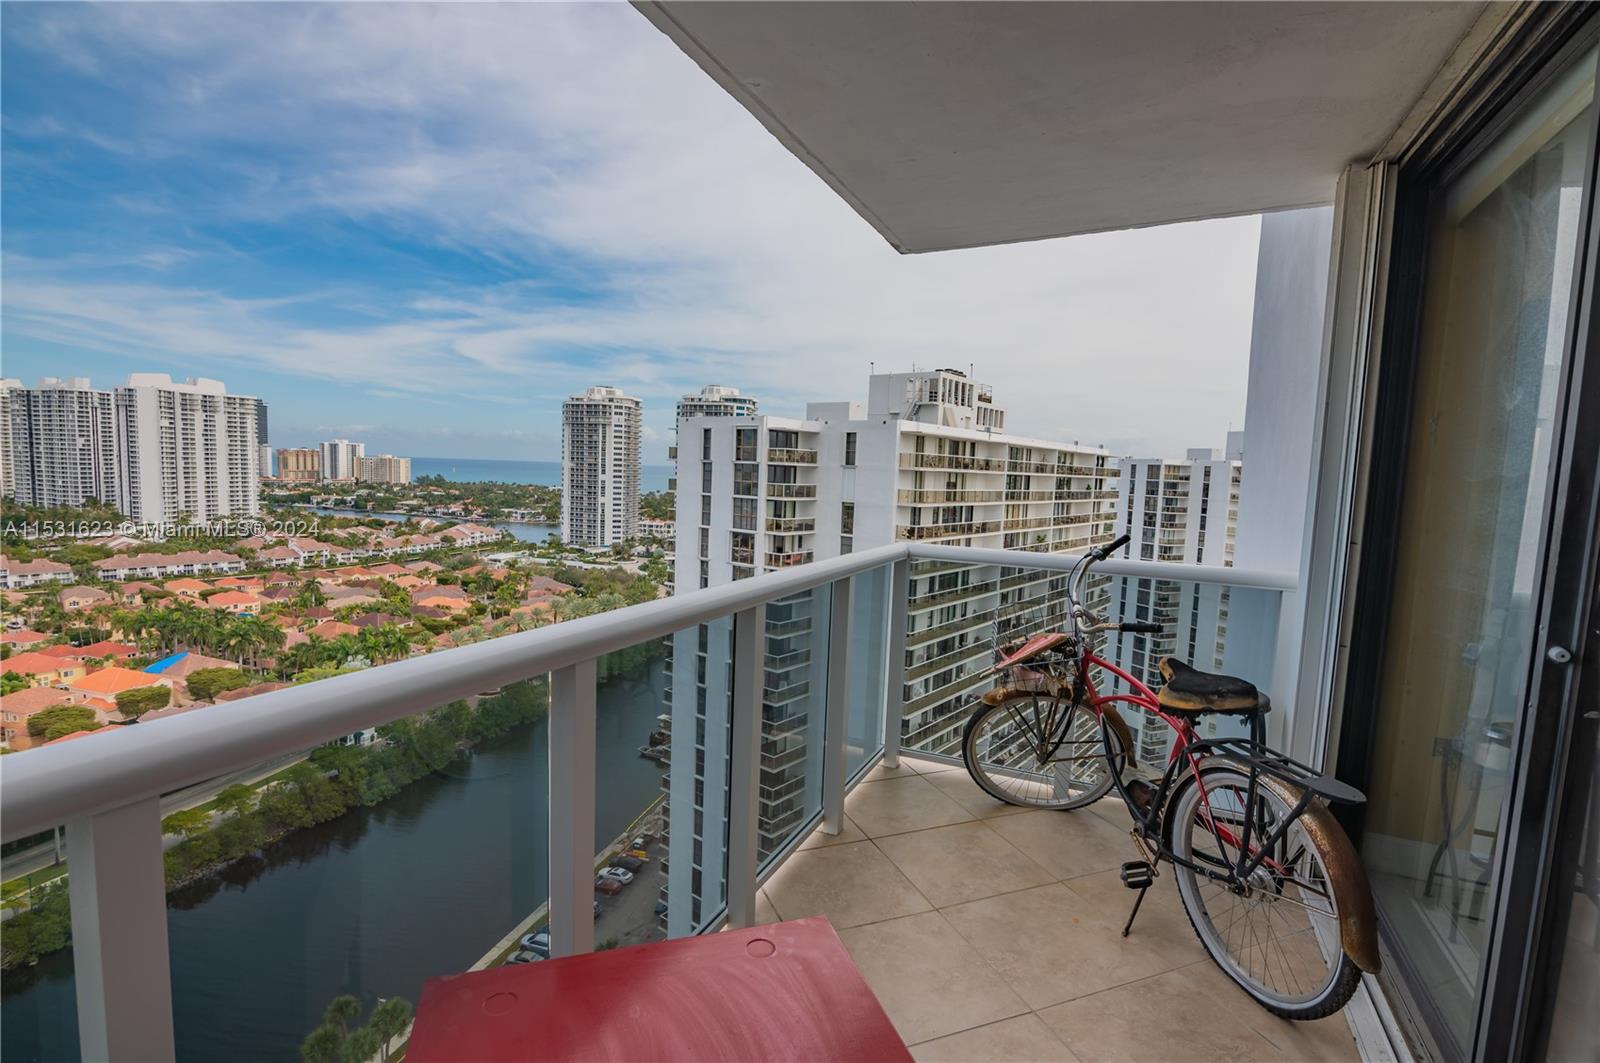 Photo of 3675 N Country Club Dr #2202 in Aventura, FL